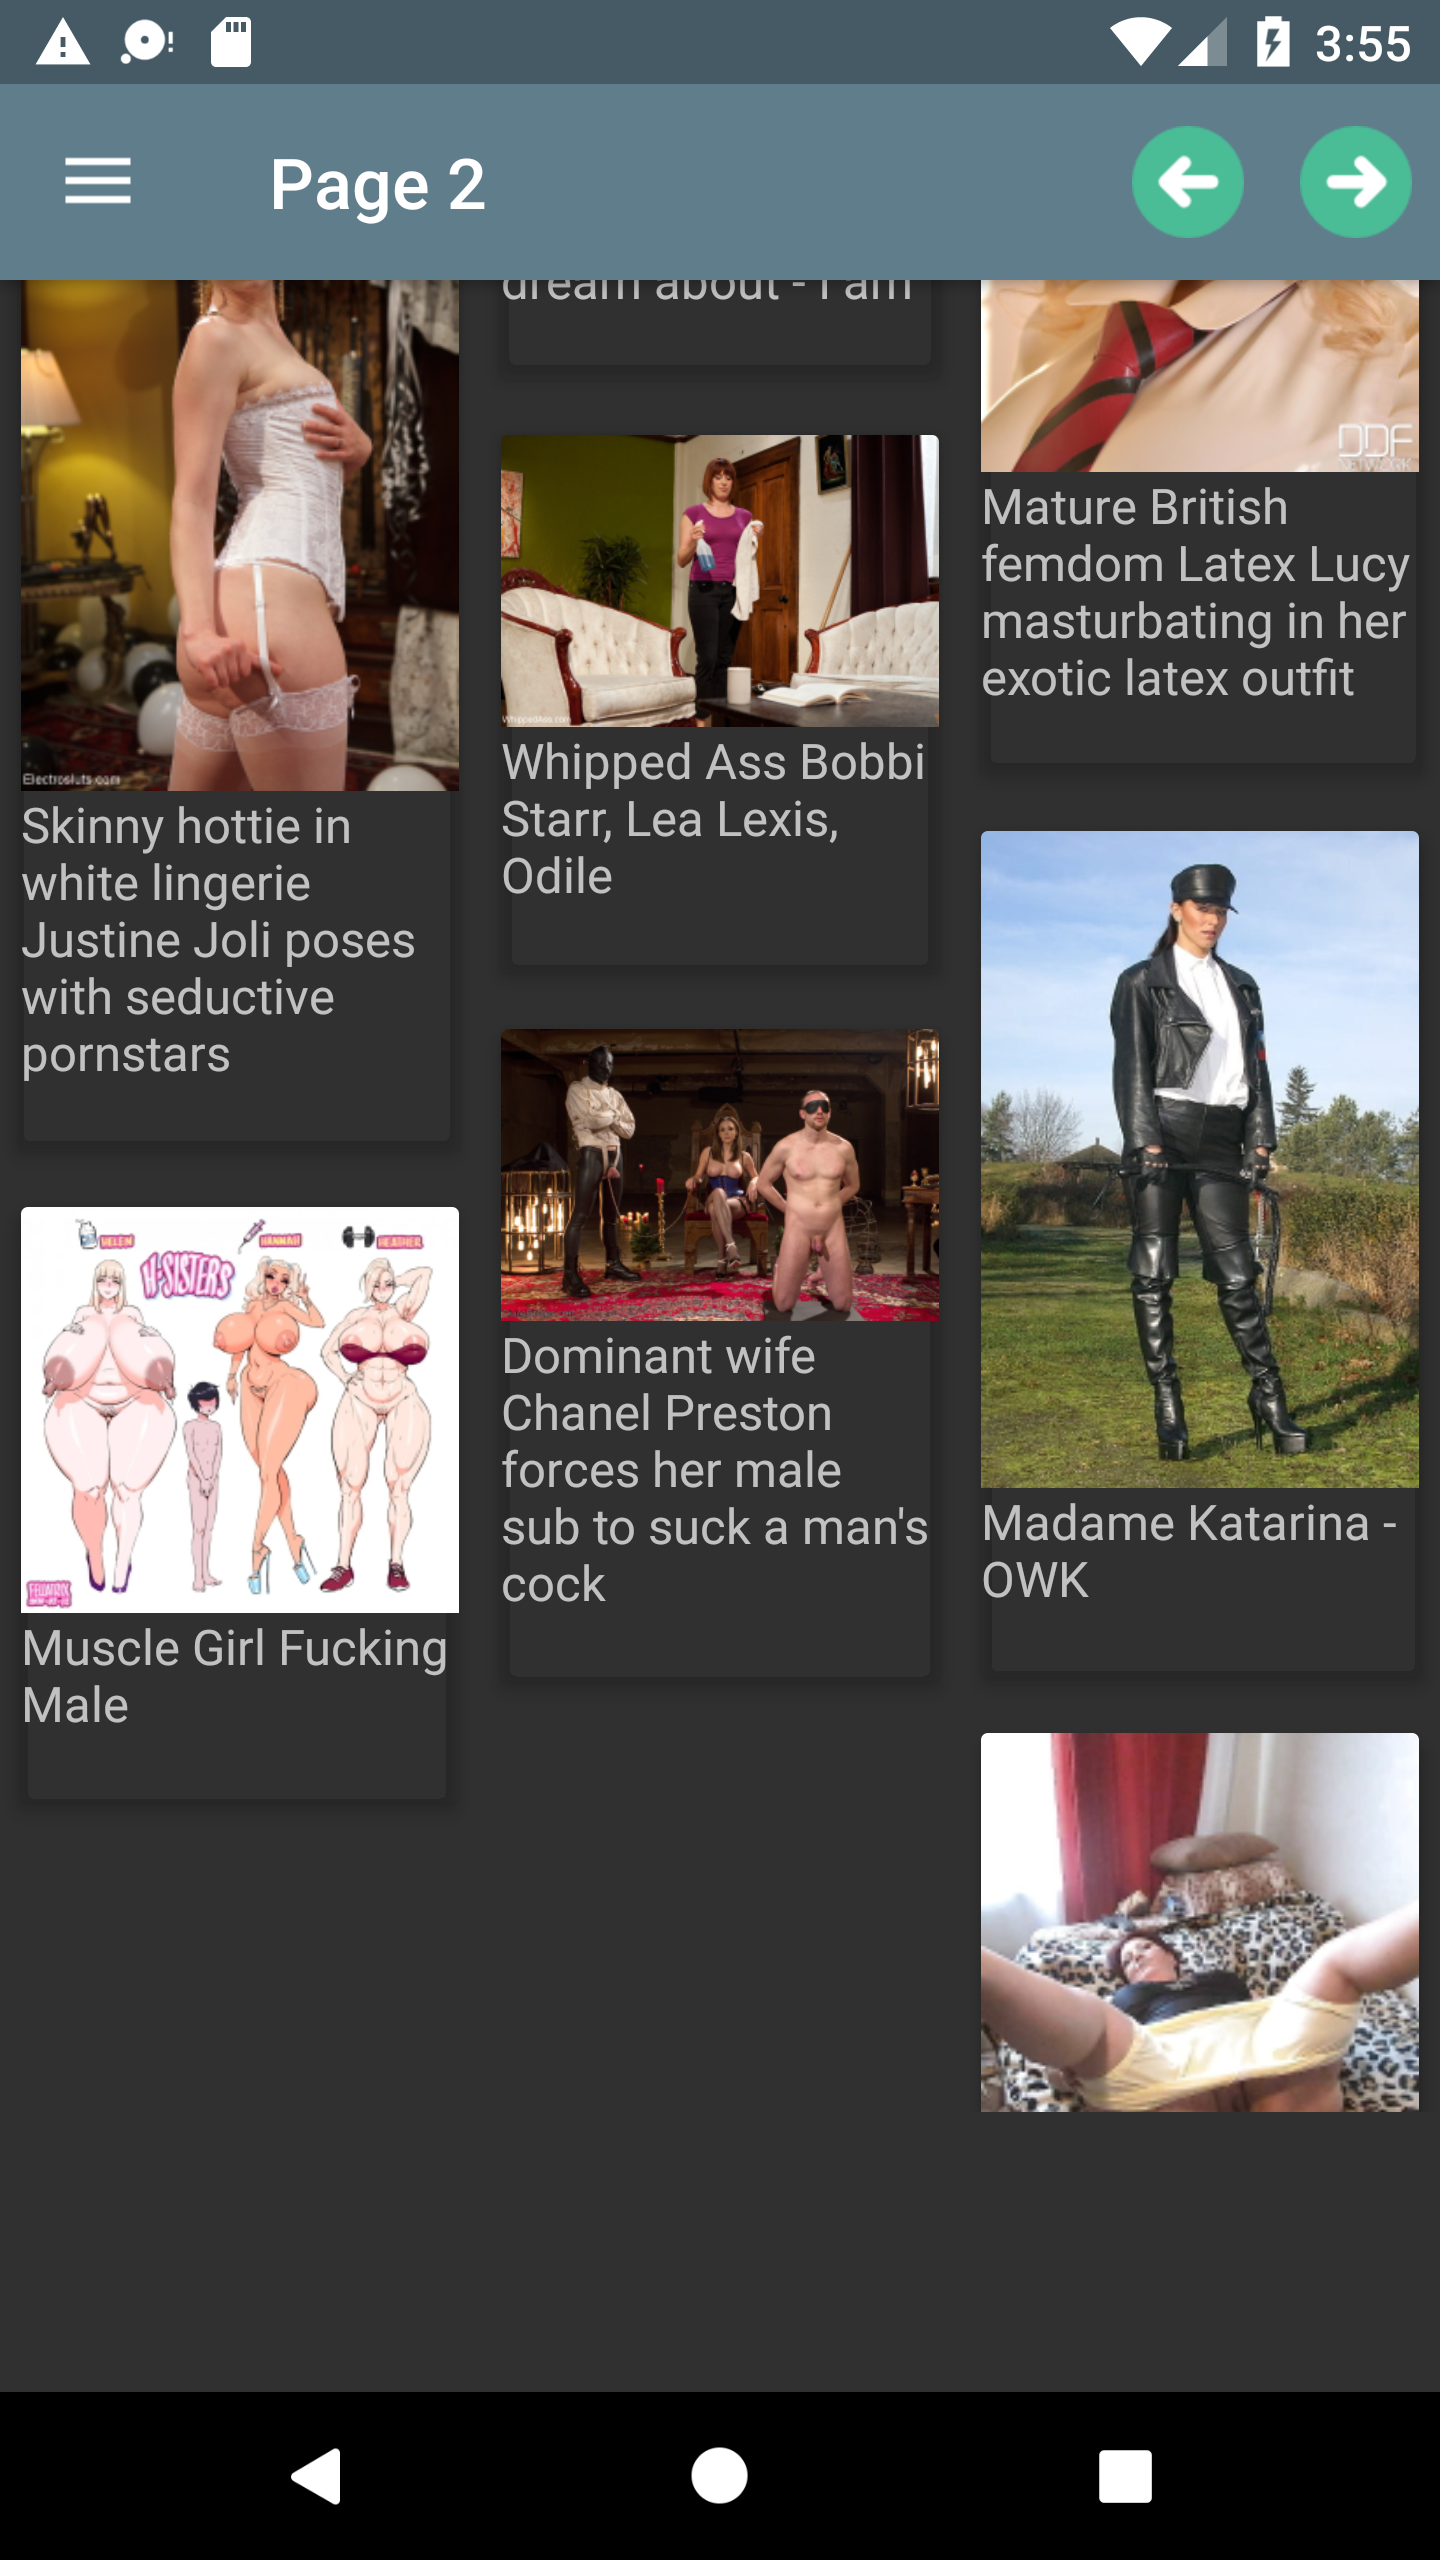 Femdom porn,galleries,sexy,offline,apps,lair,pornstars,pictures,app,pegging,hentai,download,pornstar,pic,apk,mythras,erotic,picturd,android,good,free,wallpapers,pics,for,hot